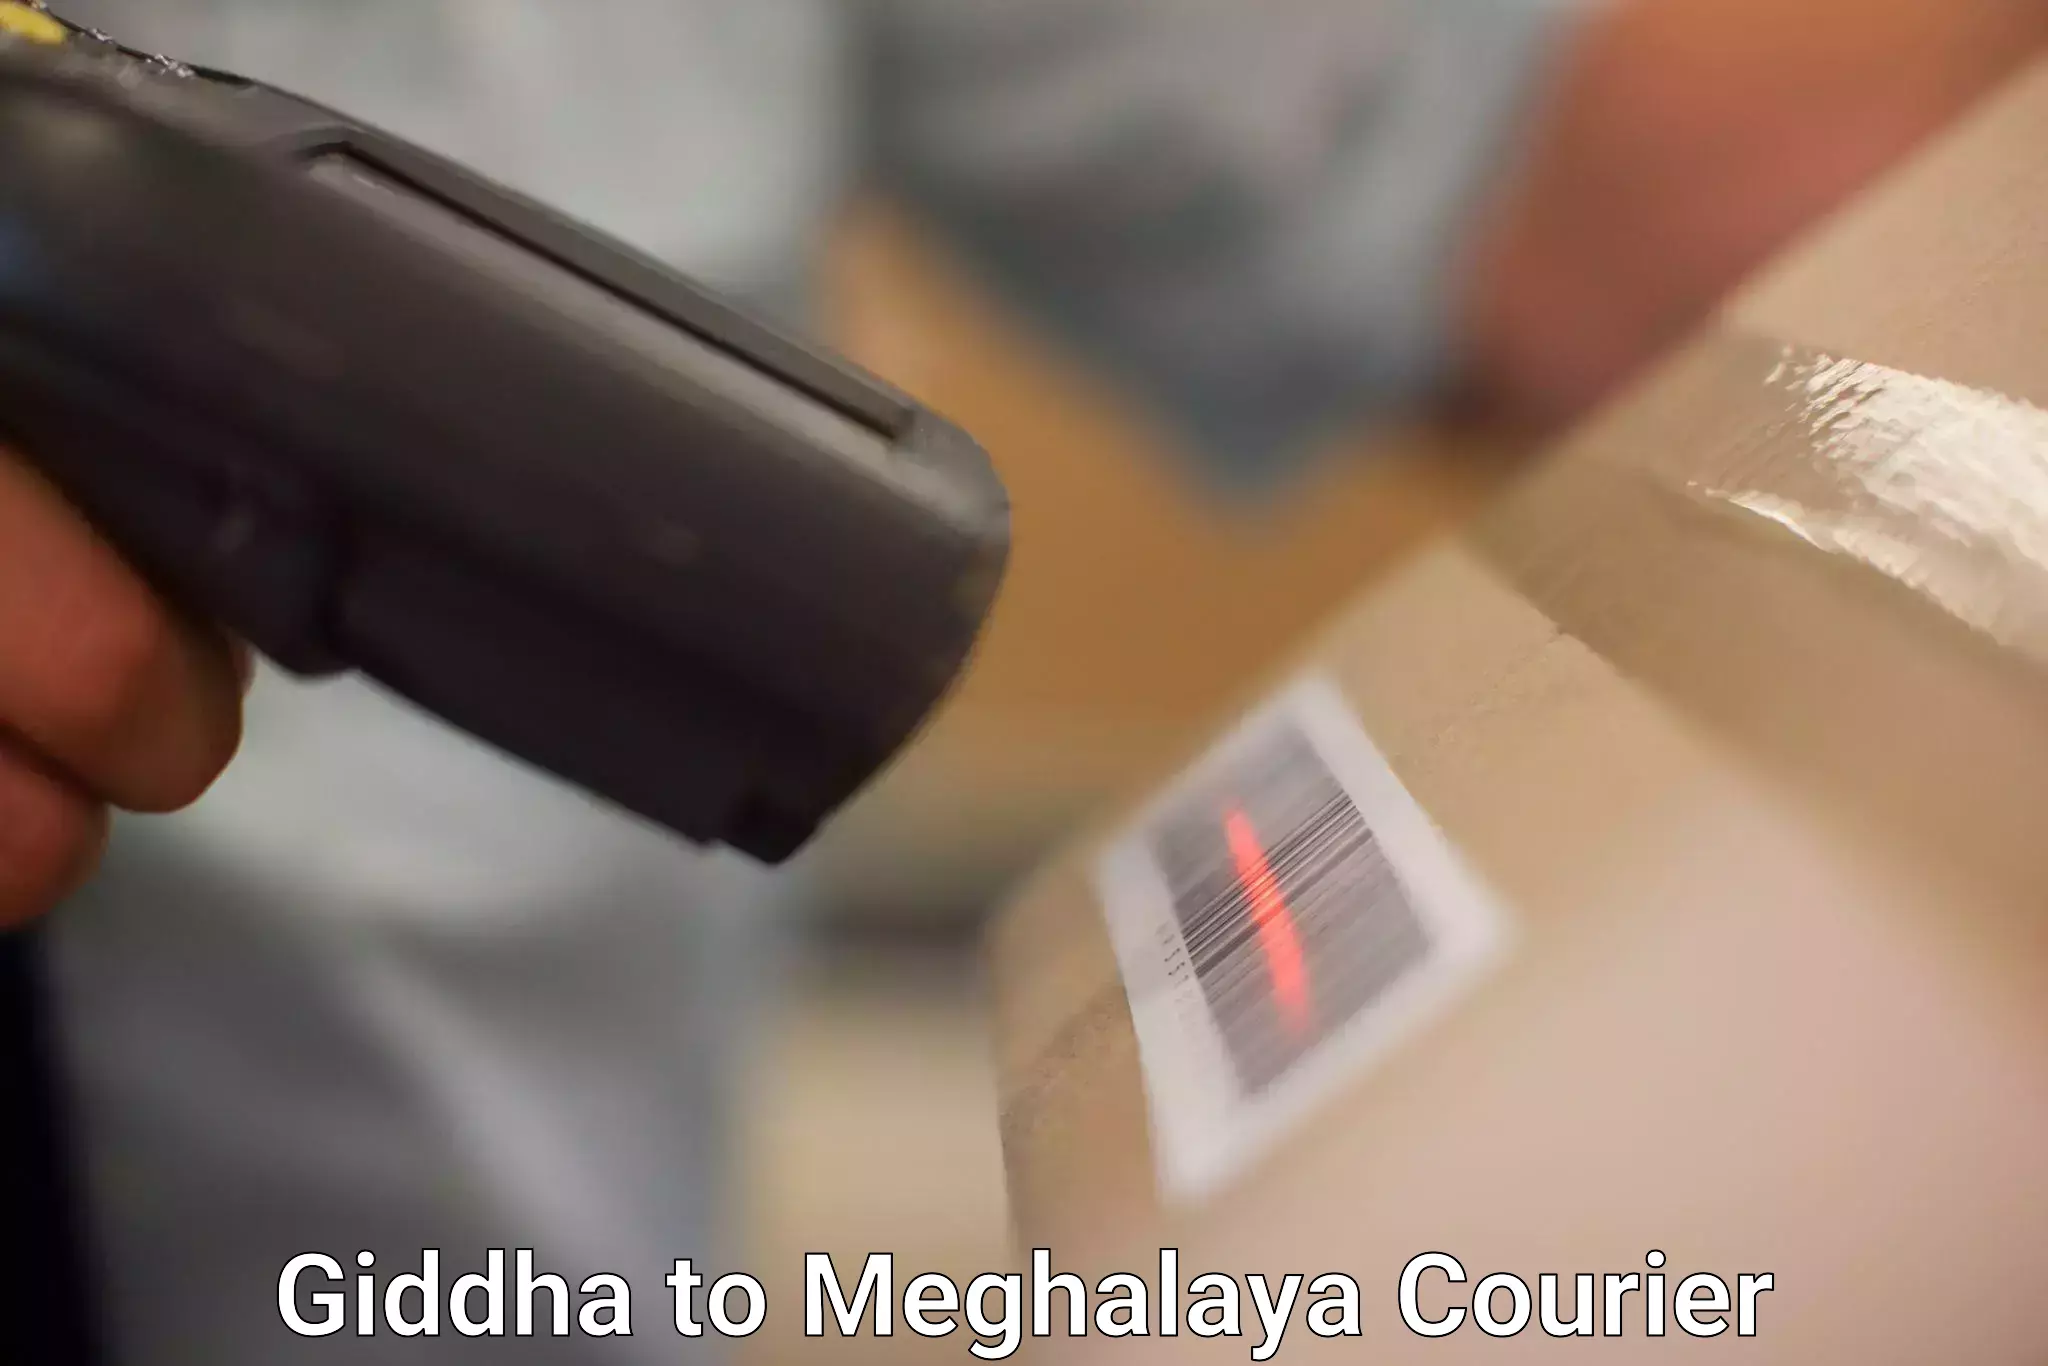 Quality courier partnerships in Giddha to Shillong